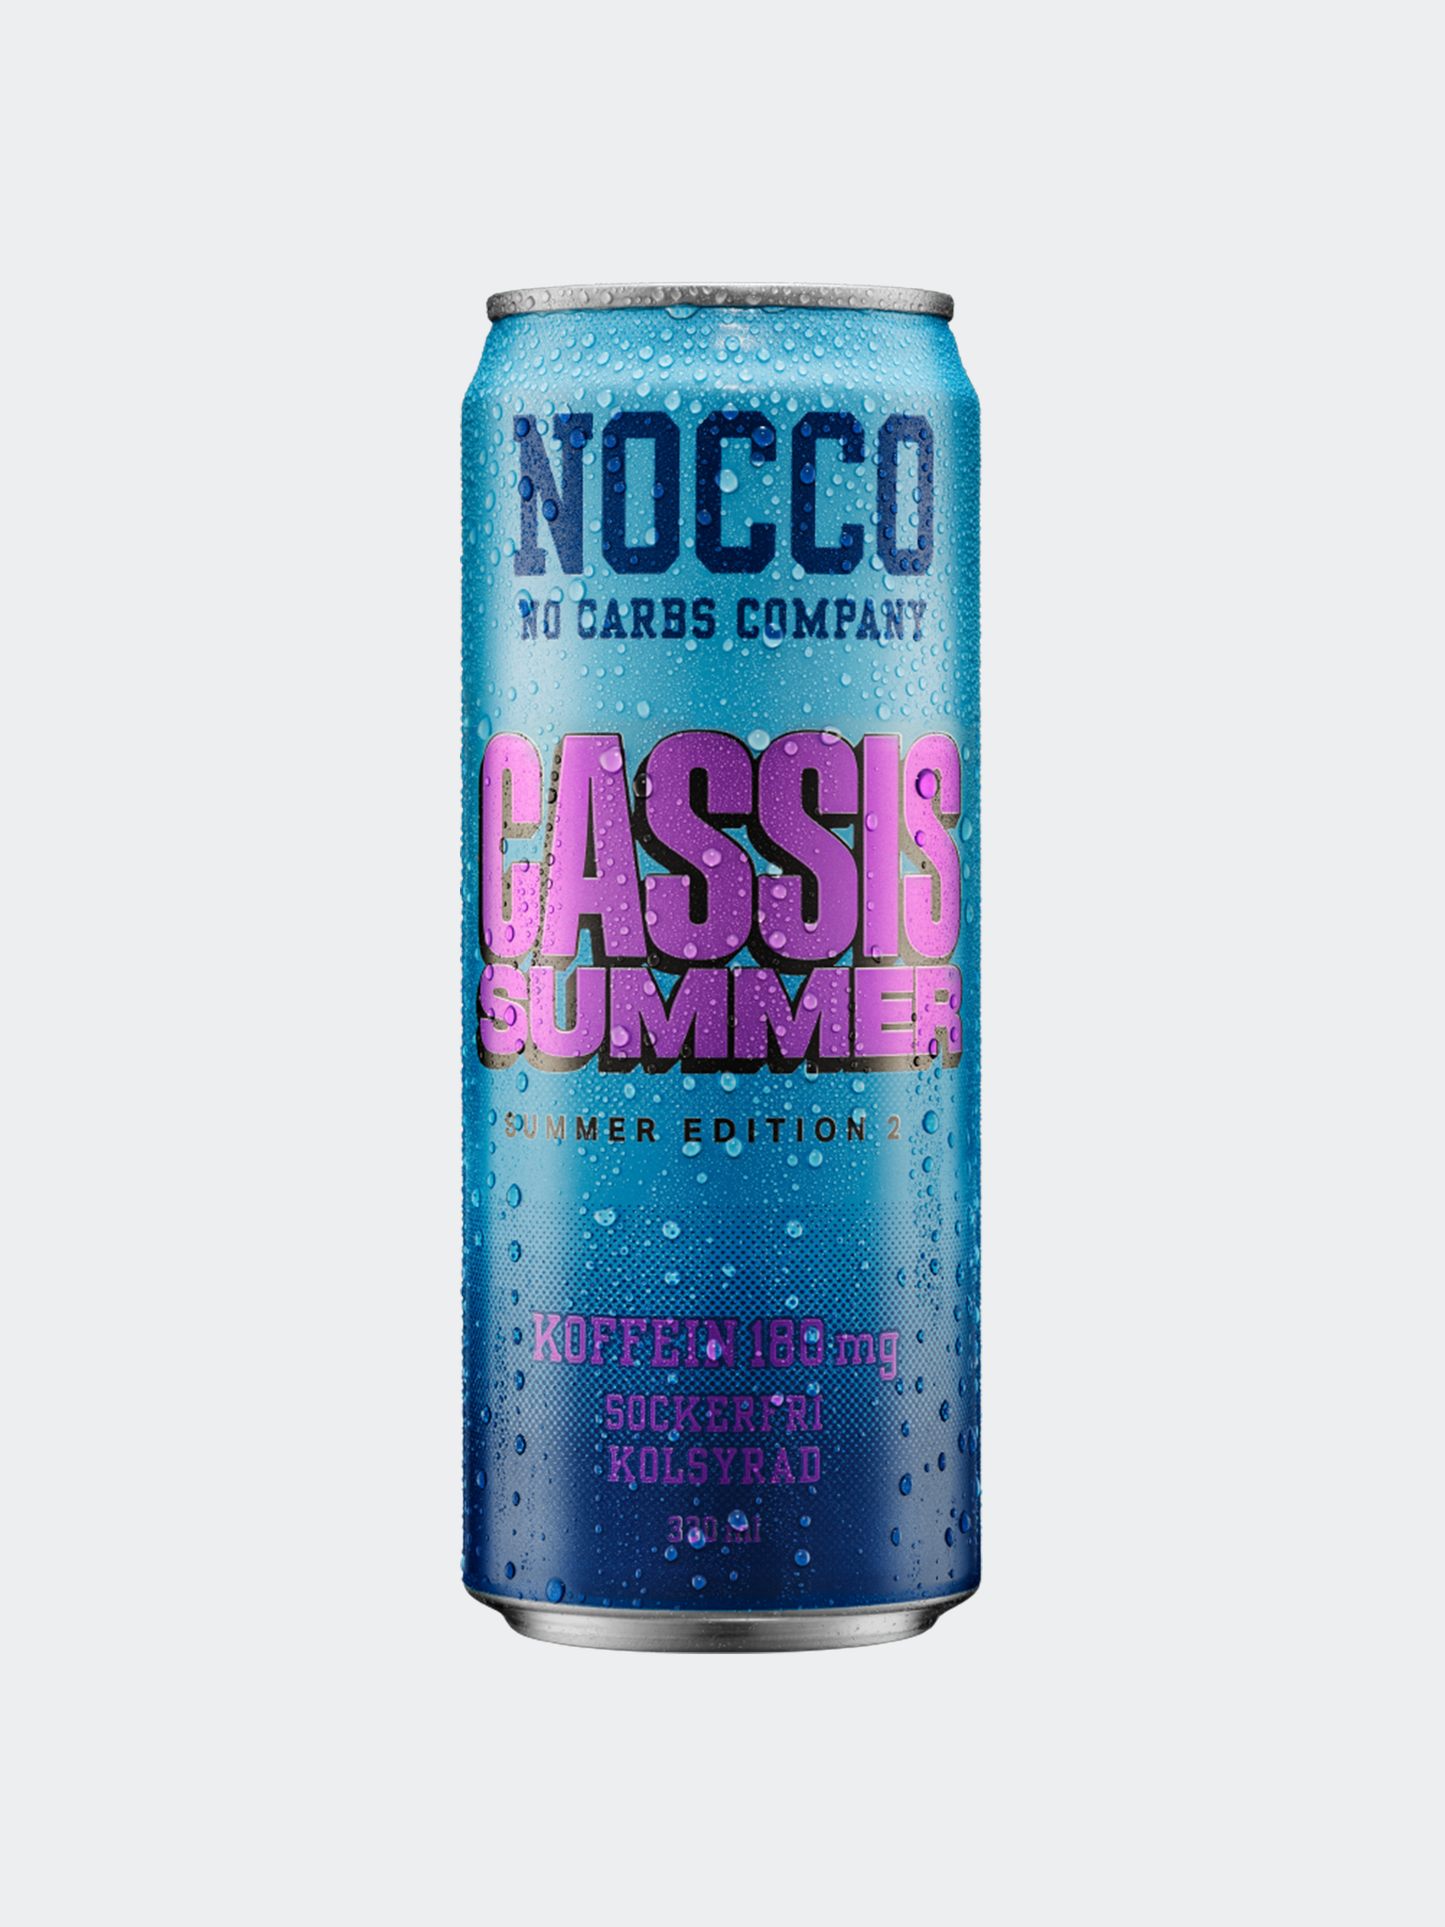 NOCCO Cassis Summer - 330ml